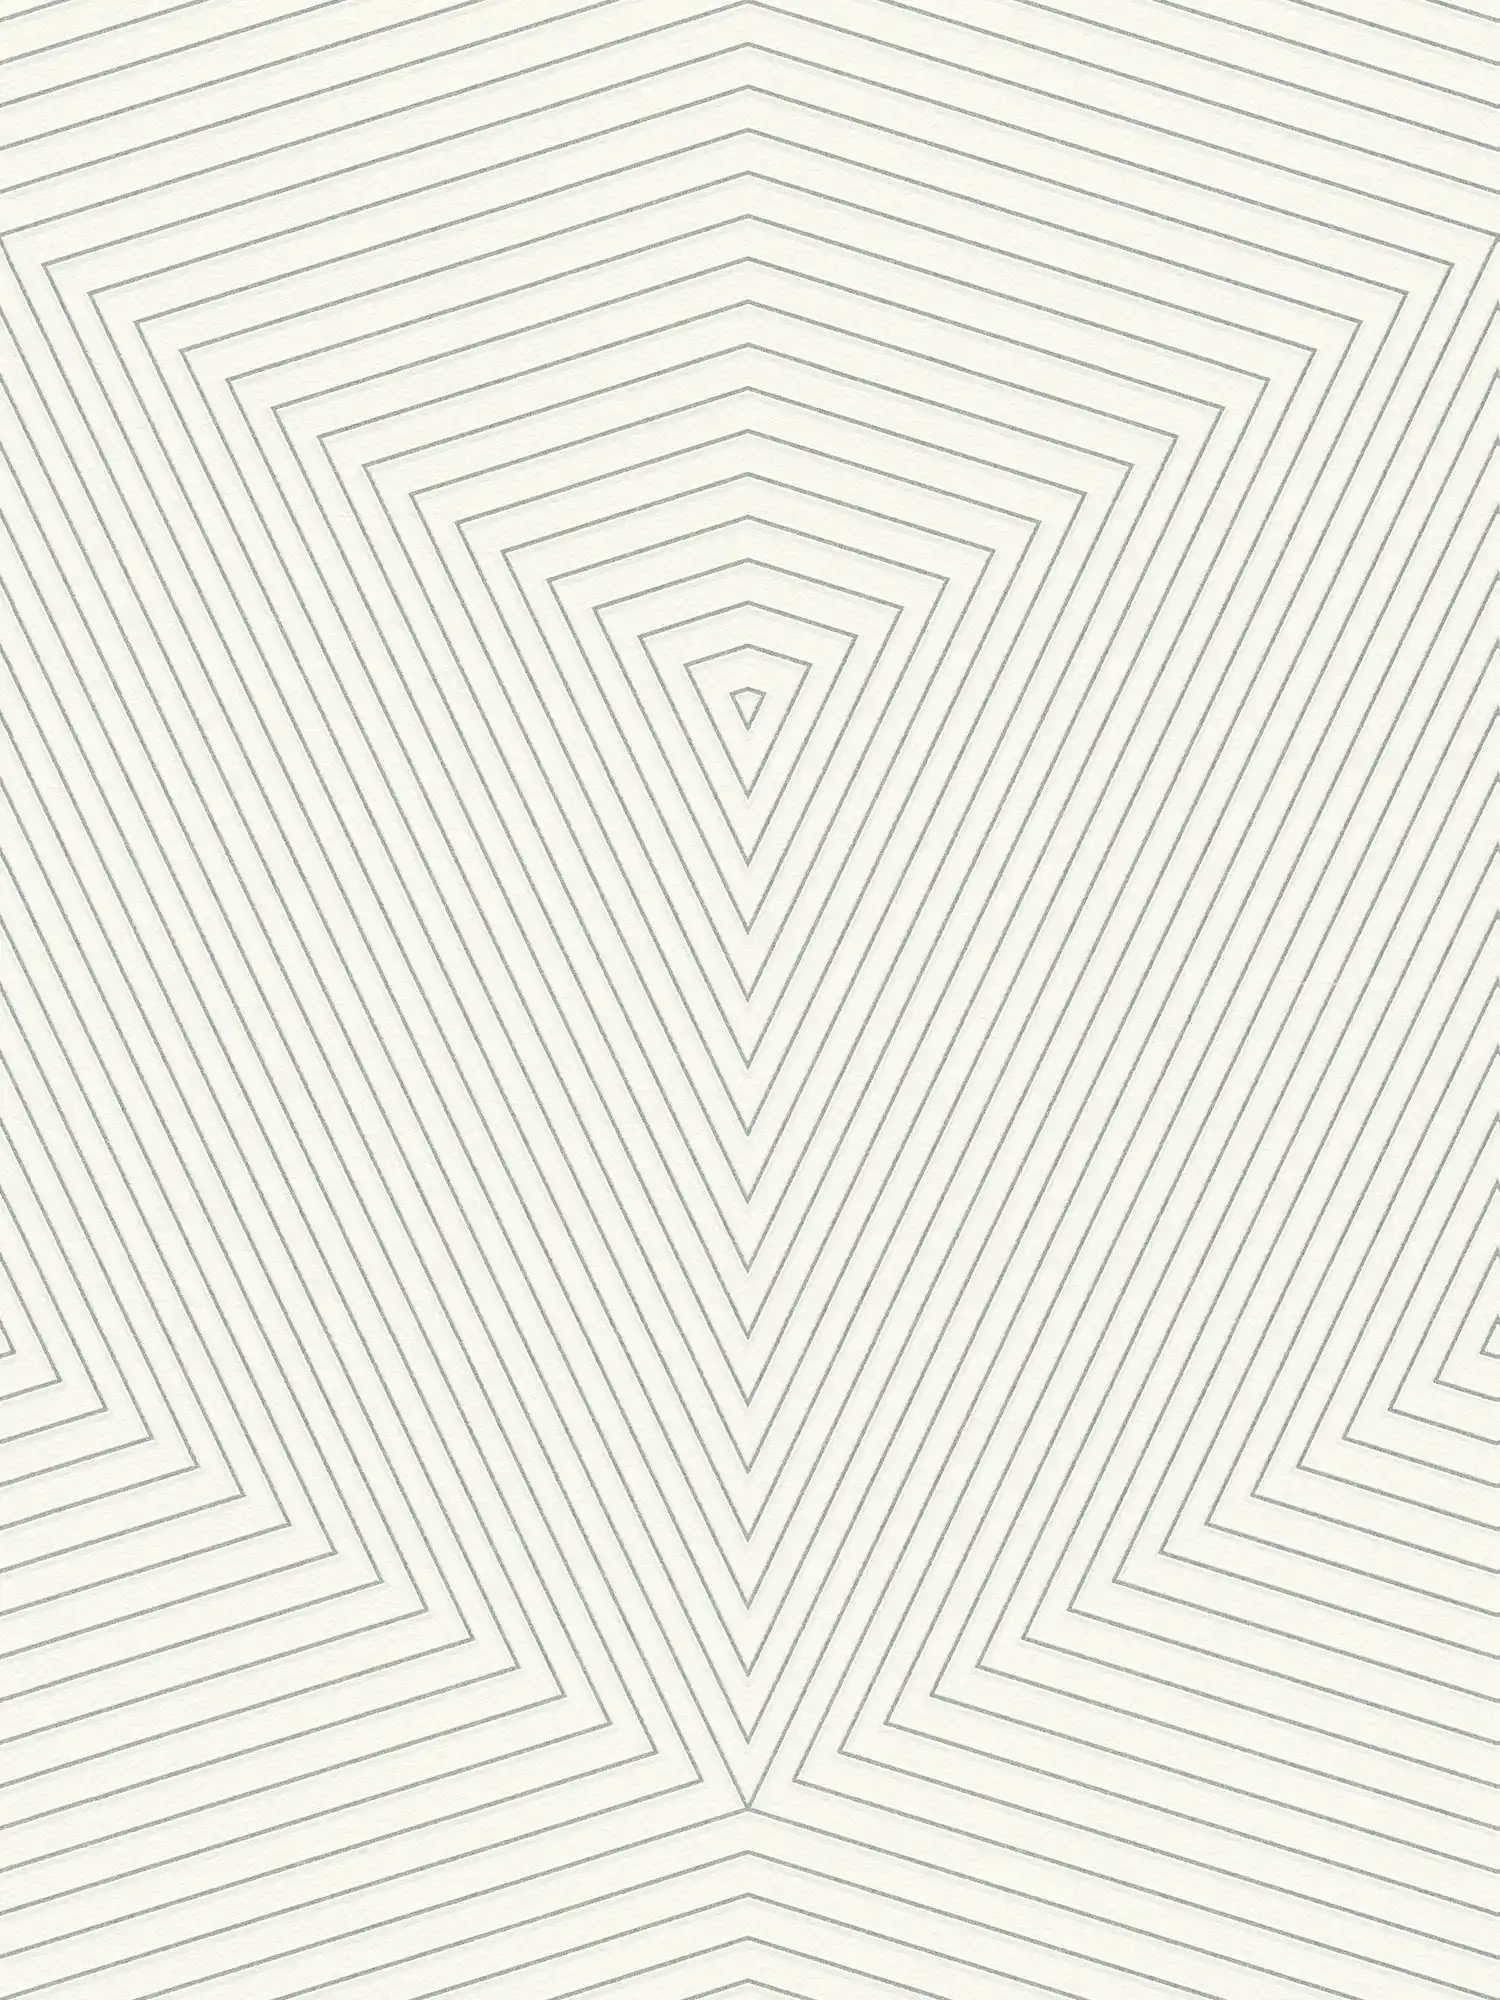 Pattern wallpaper with lines design & metallic effect - white, silver
